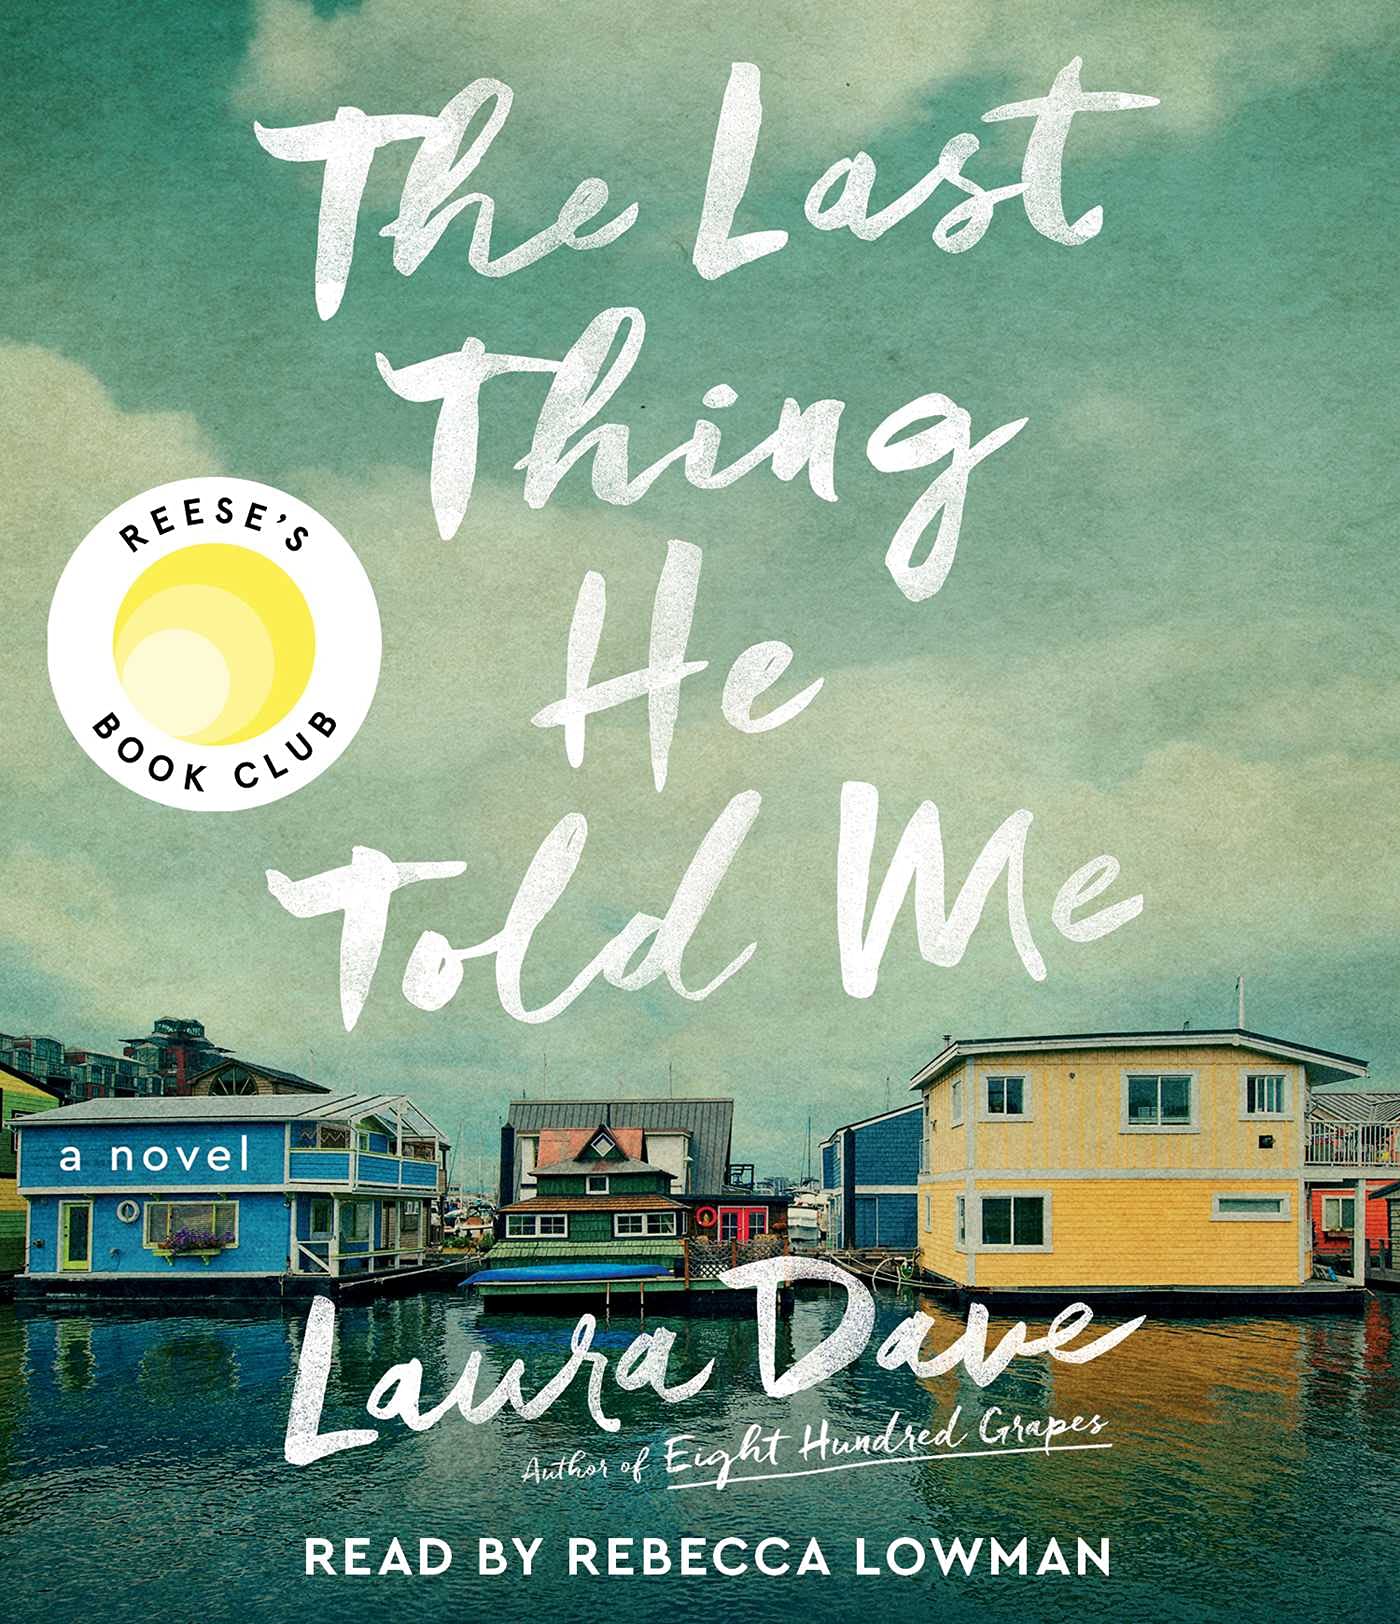 The Last Thing He Told Me by Laura Dave book cover with a few small houses on the water below a cloudy sky